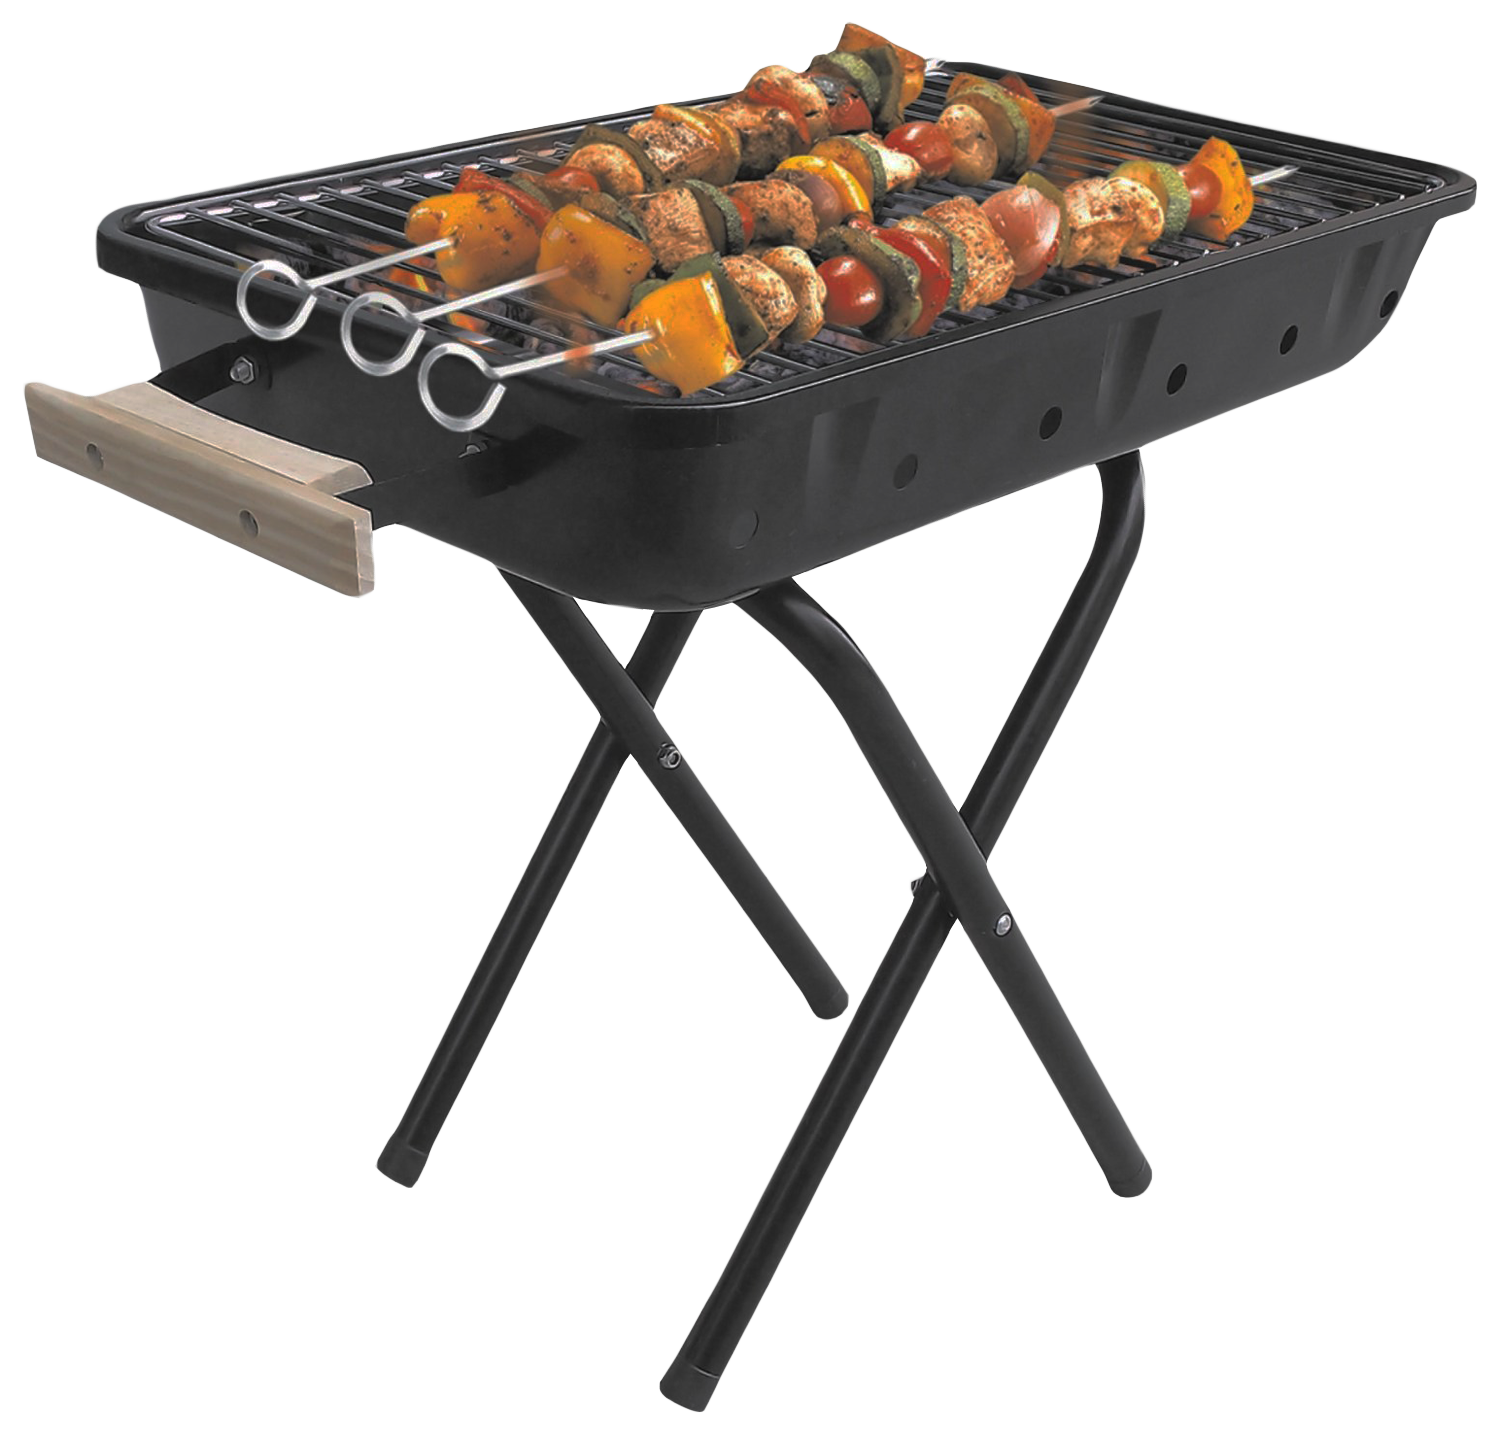 Grill Png Photos - Grill, Transparent background PNG HD thumbnail